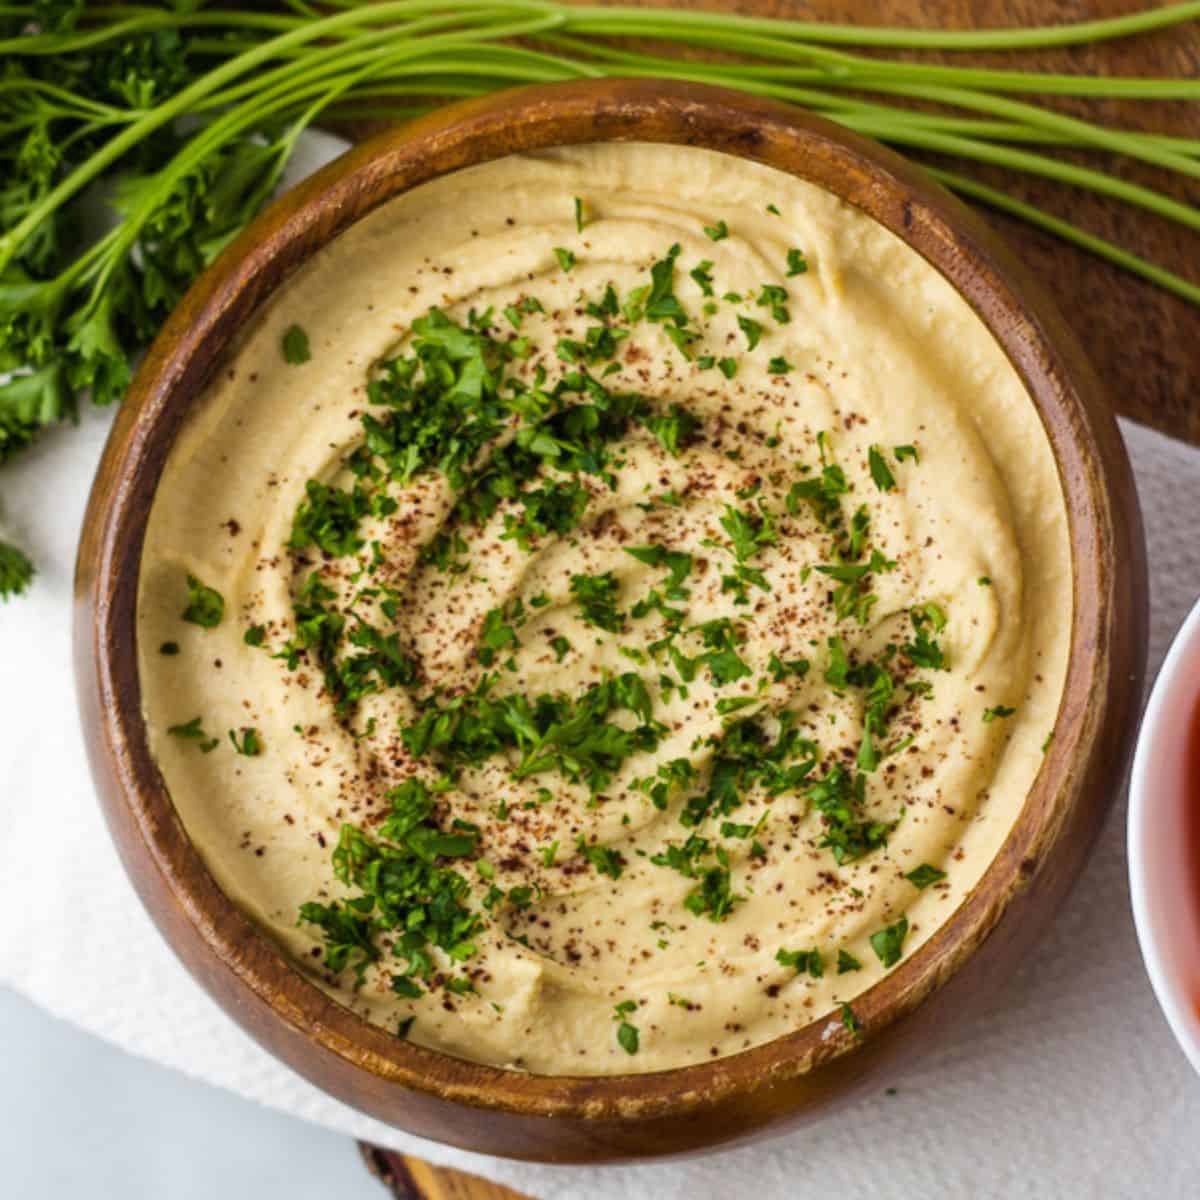 Gluten-free hummus in wood bowl topped with chopped parsley and sumac.